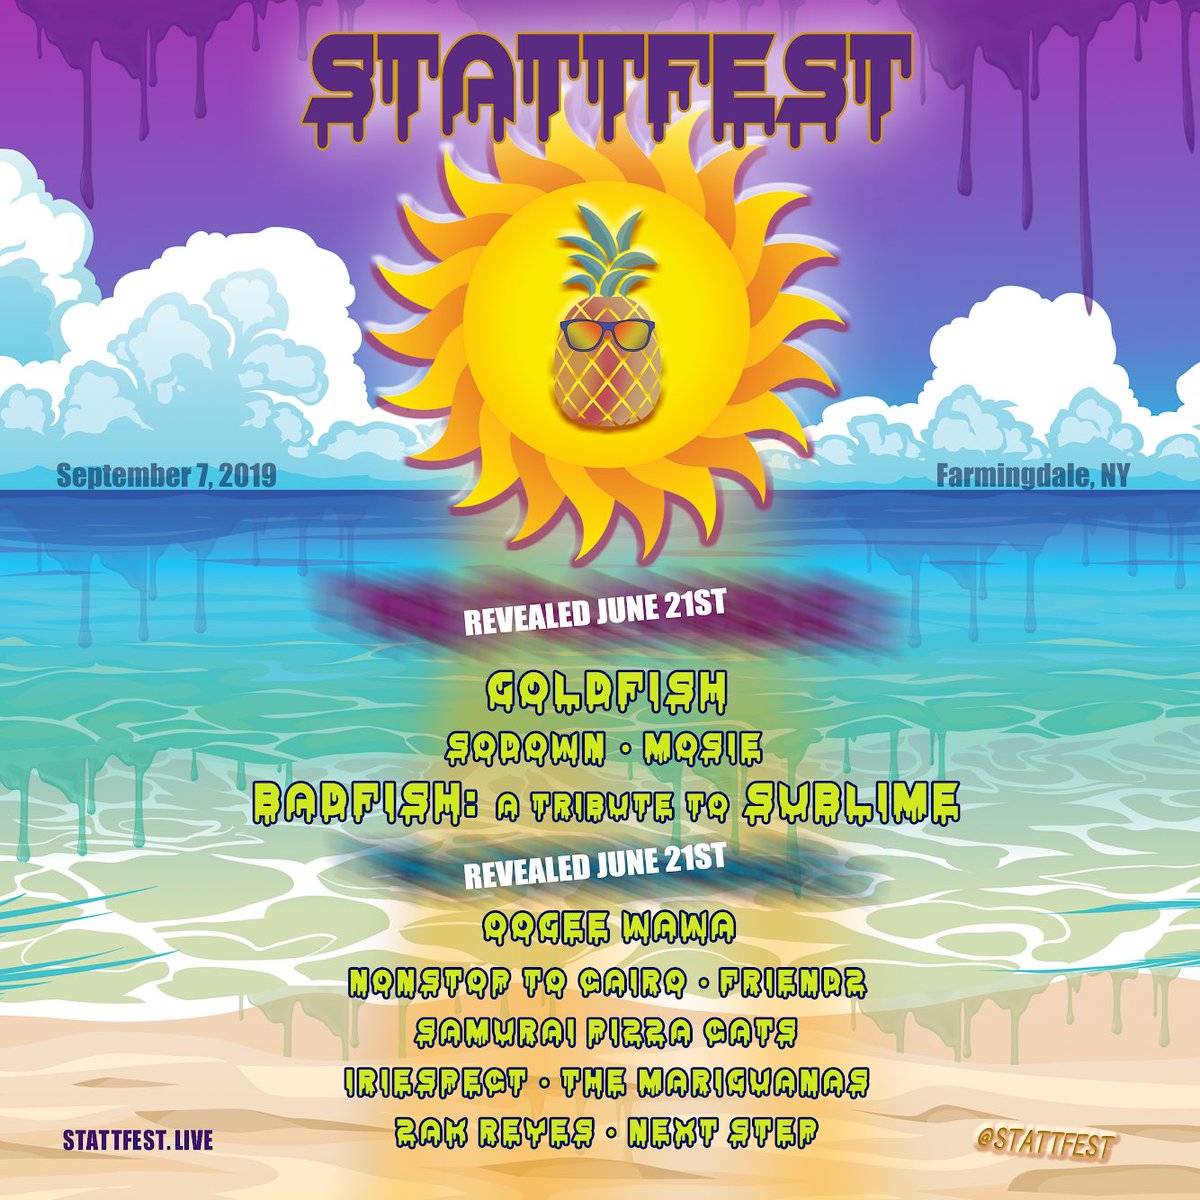 The official @FestStatt lineup is dropped! Gonna be a sick show, get your early bird tickets while they last!  
.
#GetHereStatt #stattfest #summer #summerfestival #summermusicfestival #musicfestival #summerfest #festival #longisland #longislandmusic #sublime #reggae #electrofunk